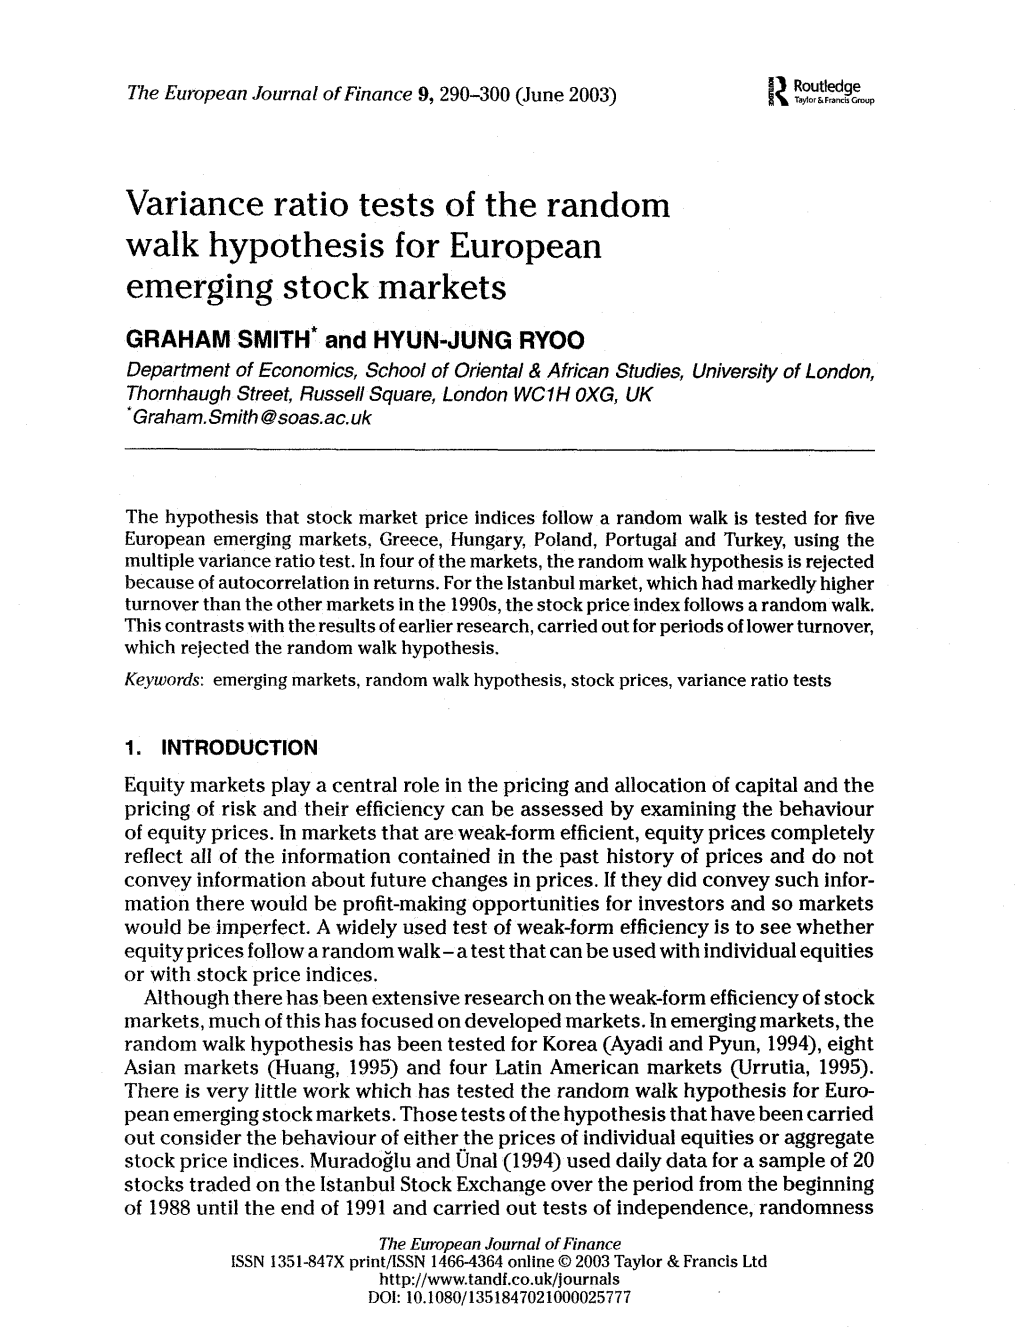 Variance Ratio Tests of the Random Walk Hypothesis for European